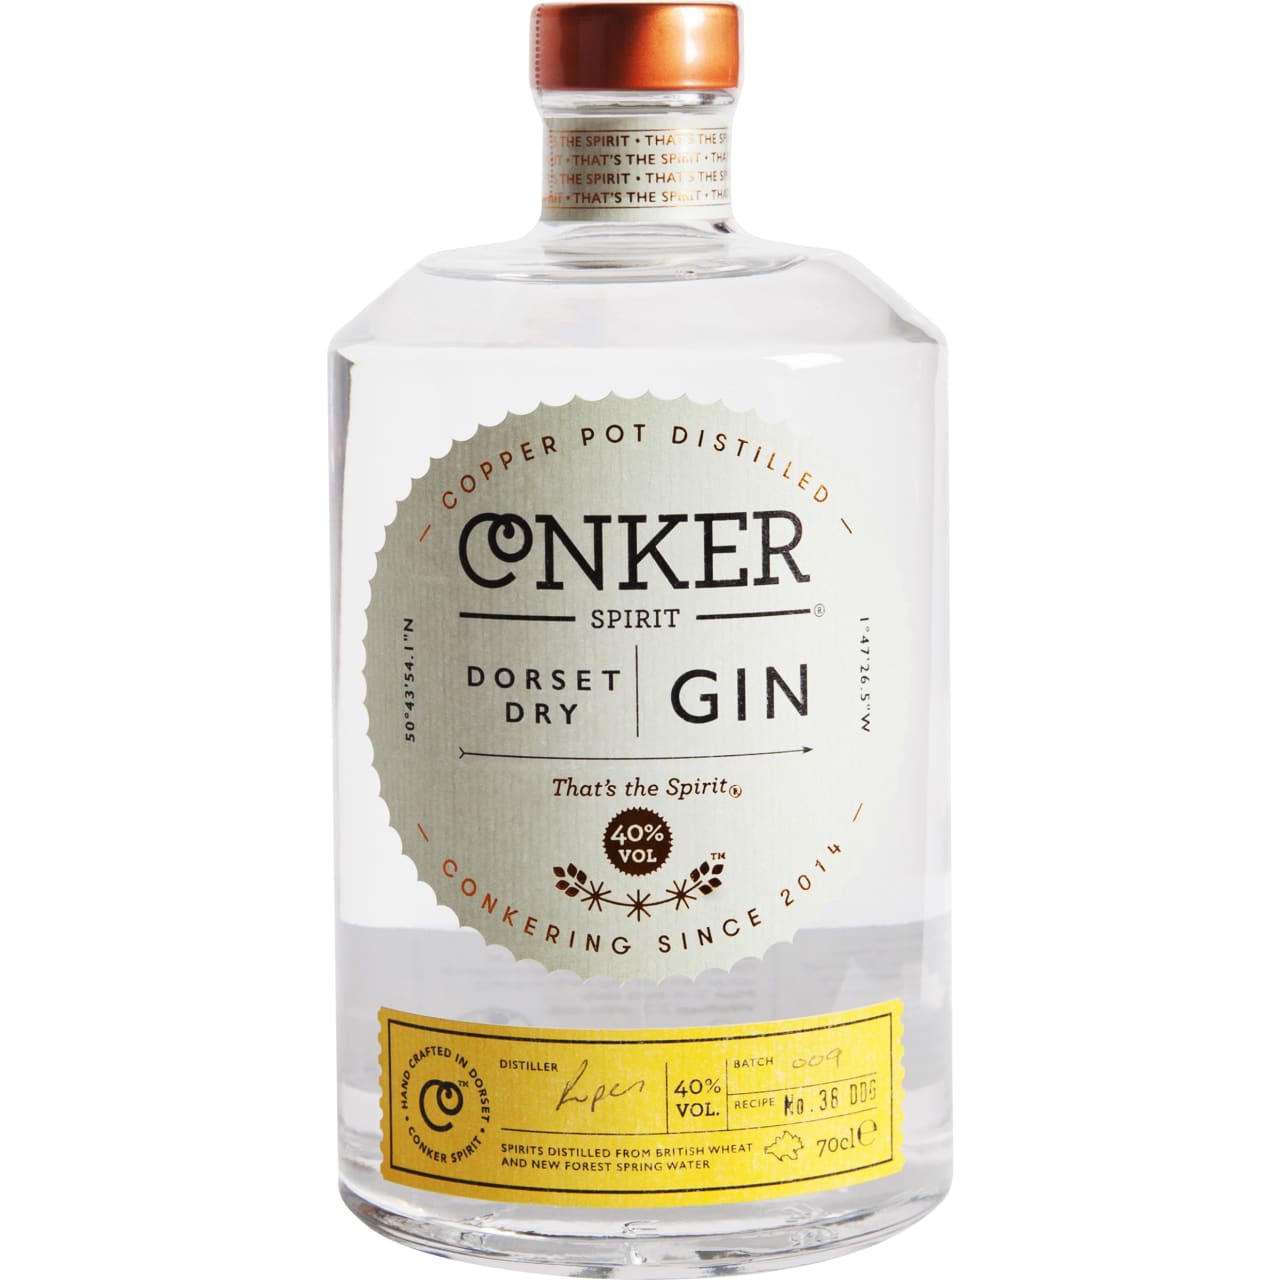 Product Image - Conker Dorset Dry Gin